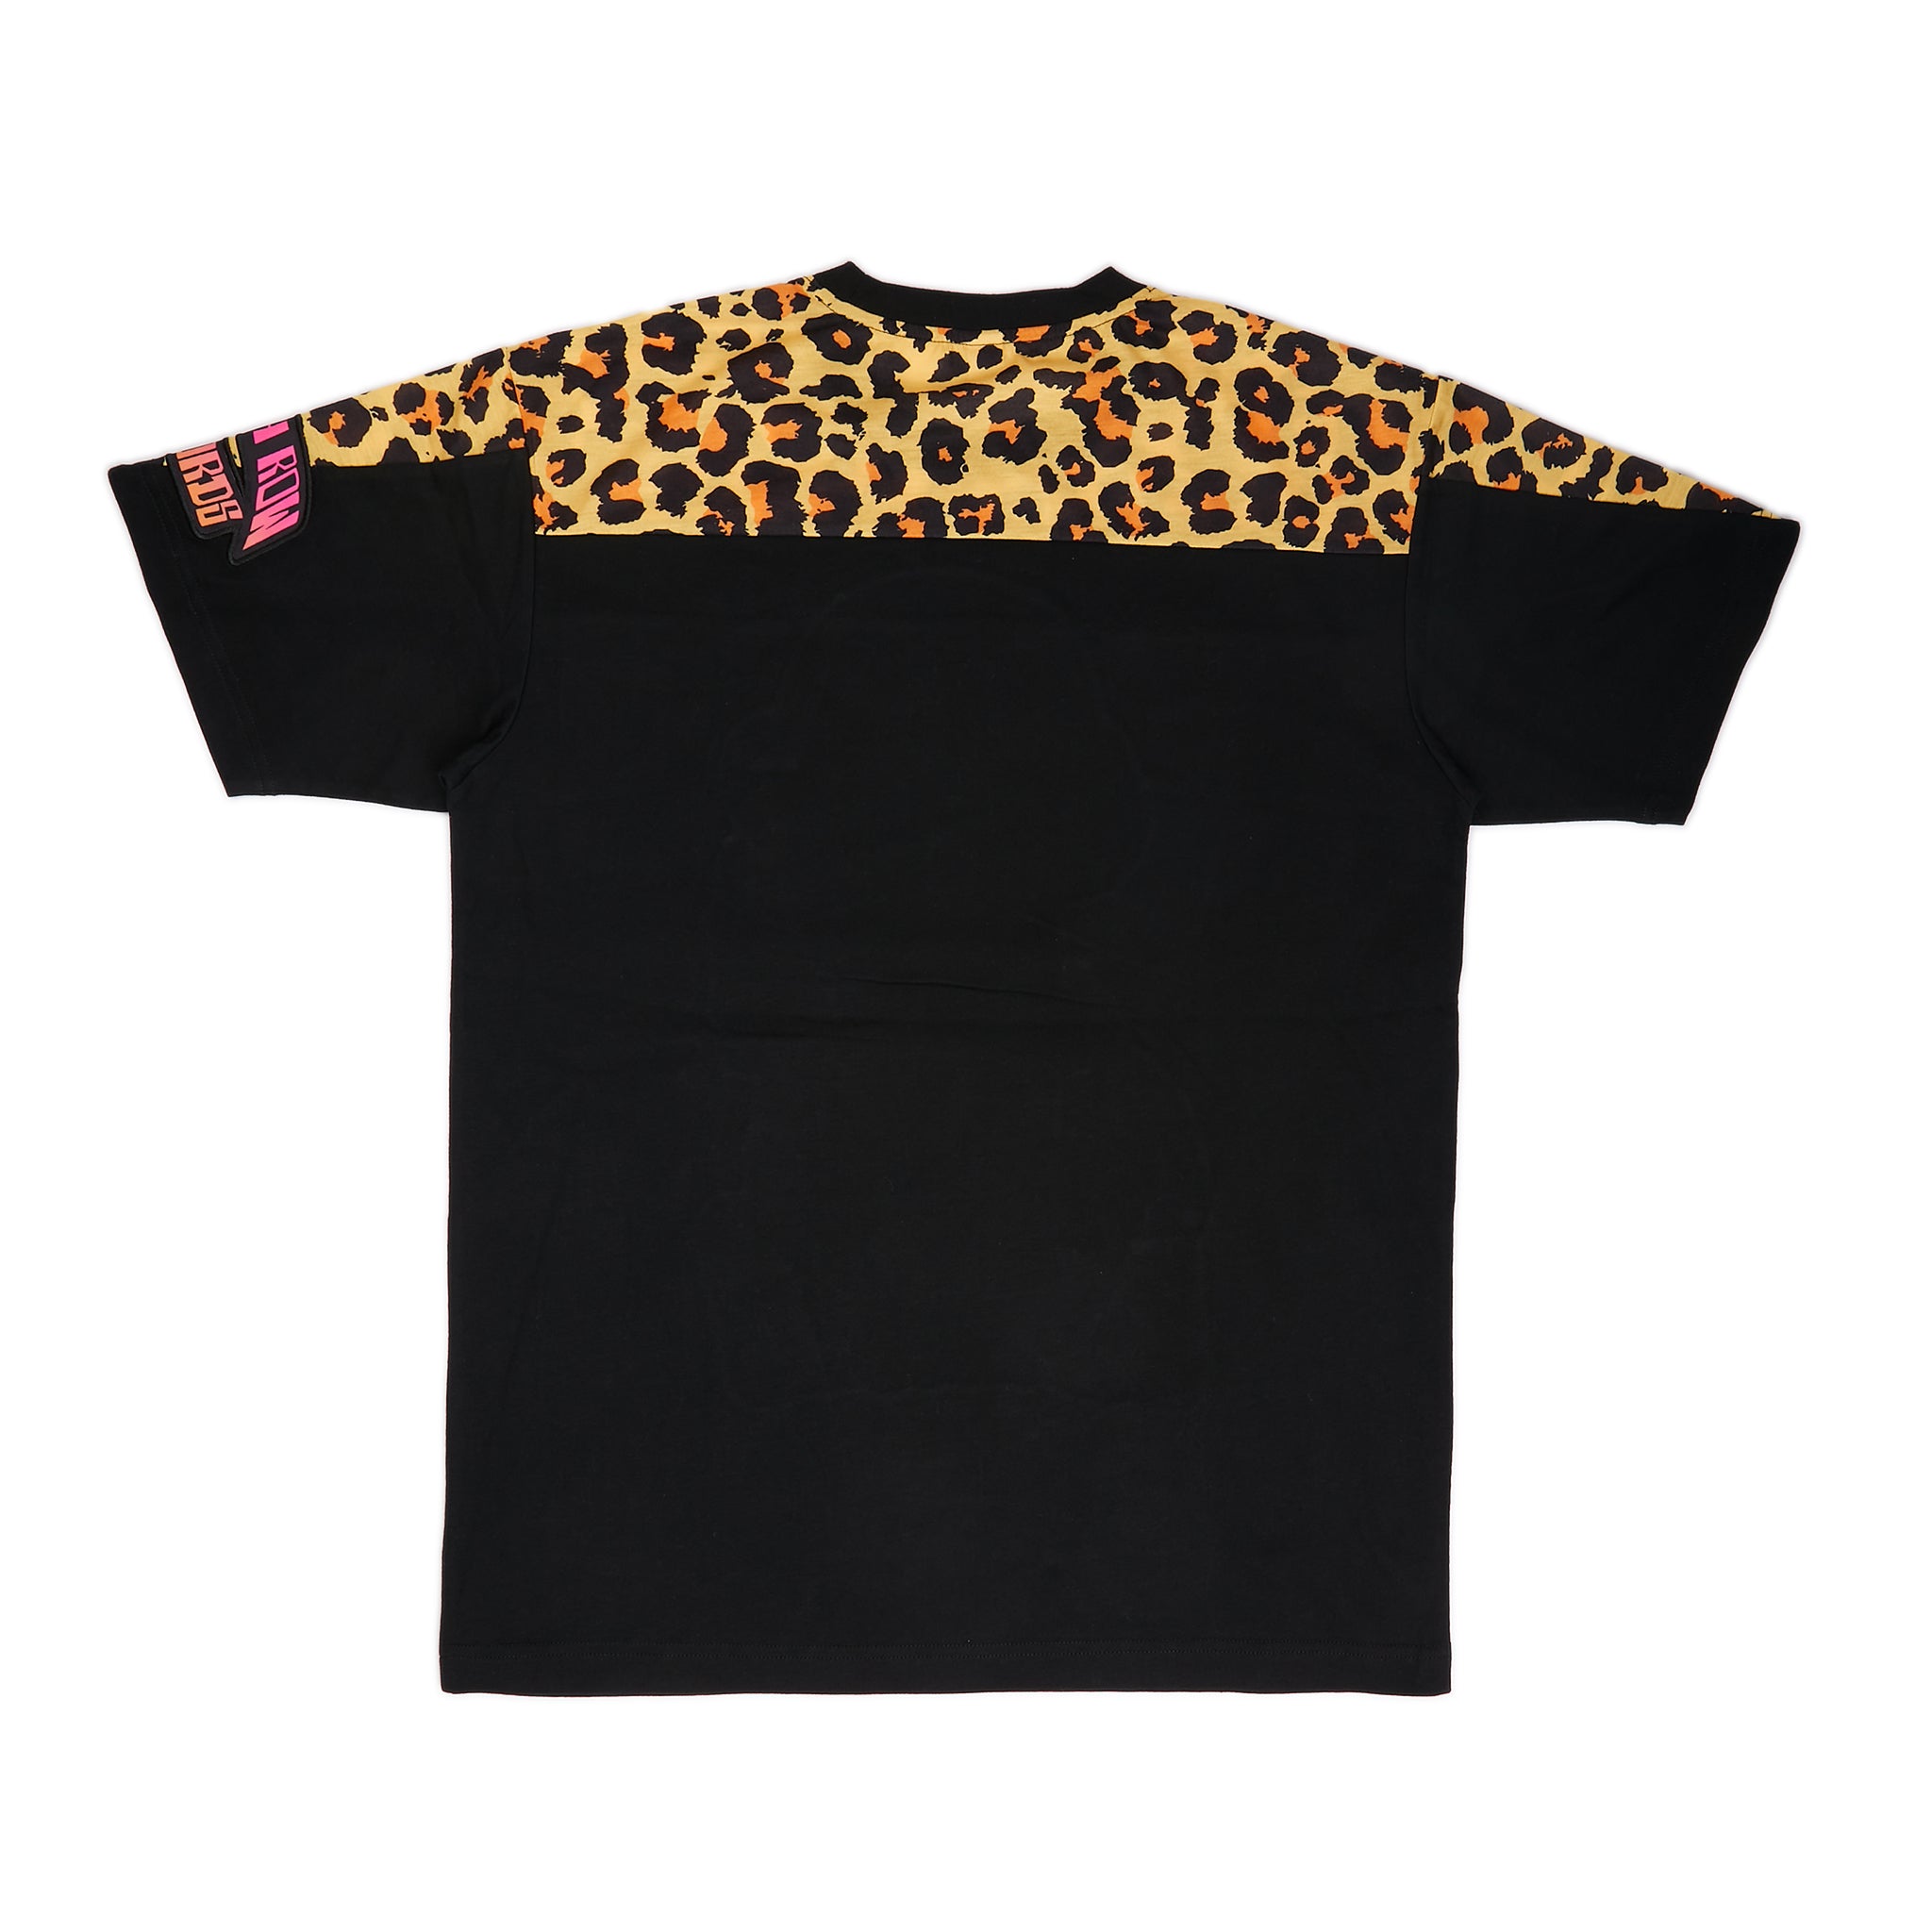 Dr. Bombay Leopard Tee